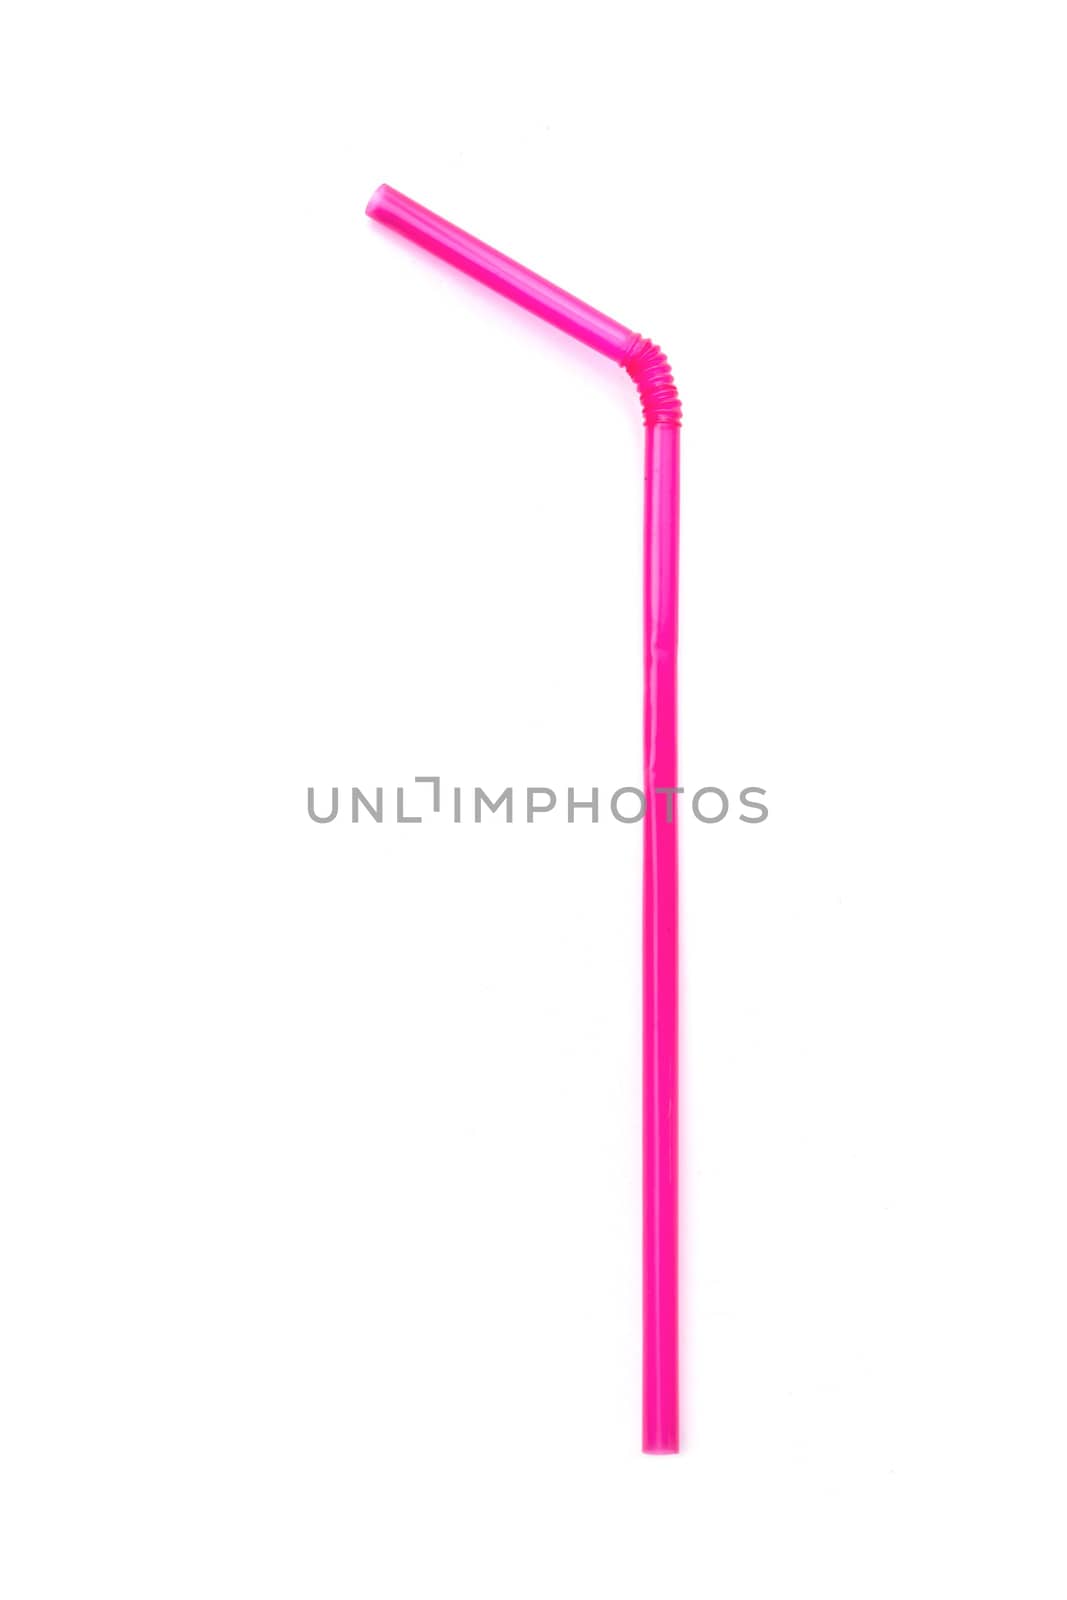 Pink straws on the white background